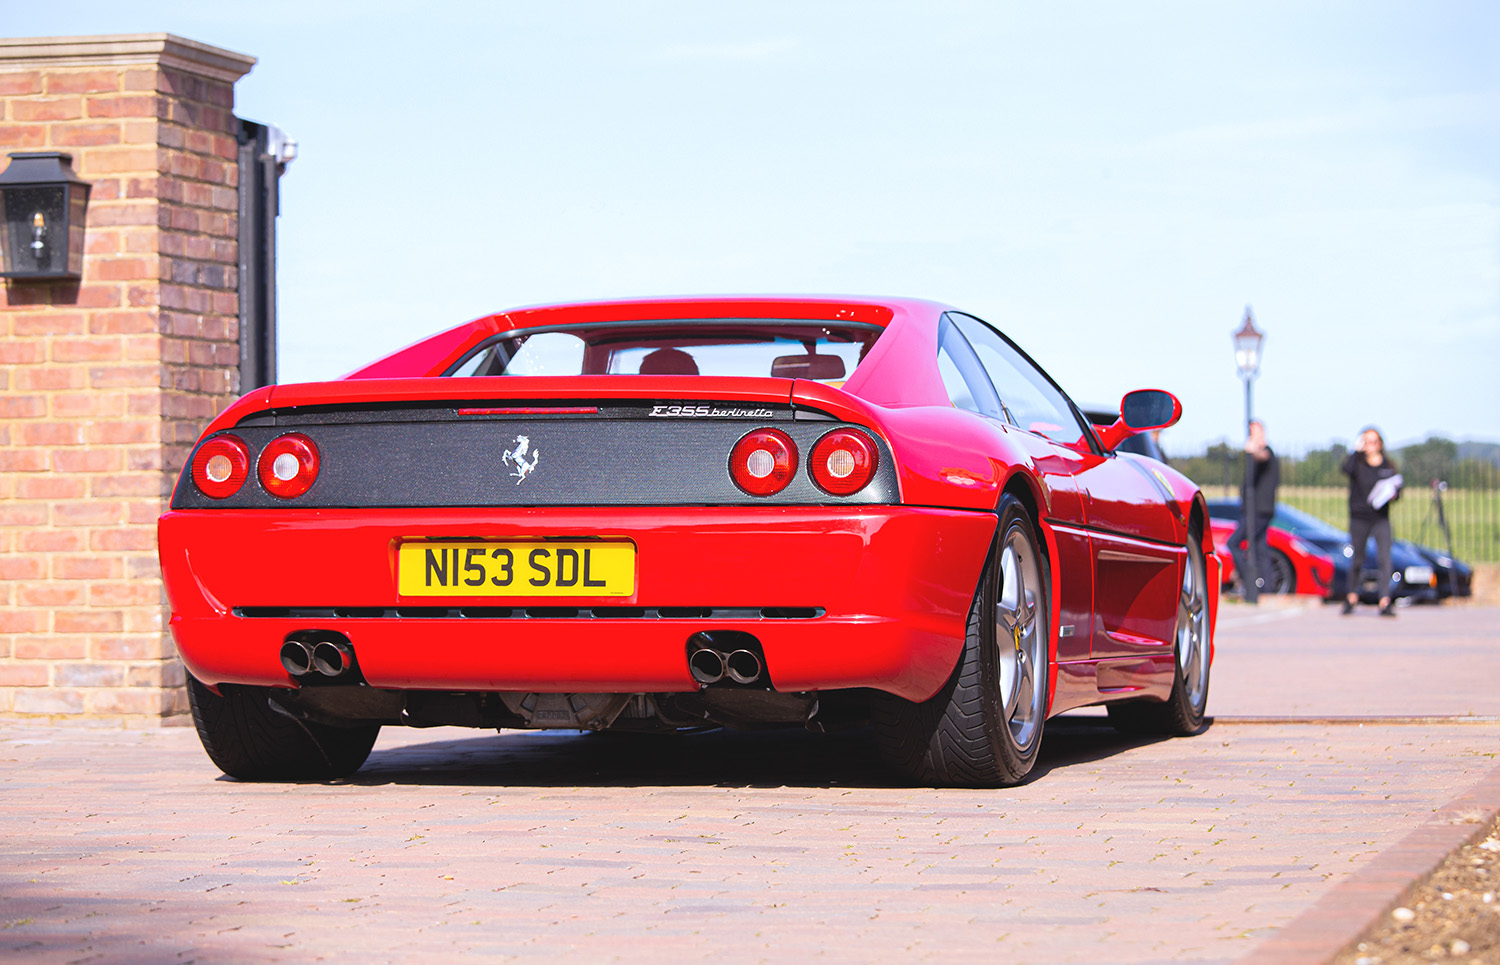 Red Ferrari F355 Berlinetta coupe in England is very similar to the F355 race car that crashed in the neighborhood